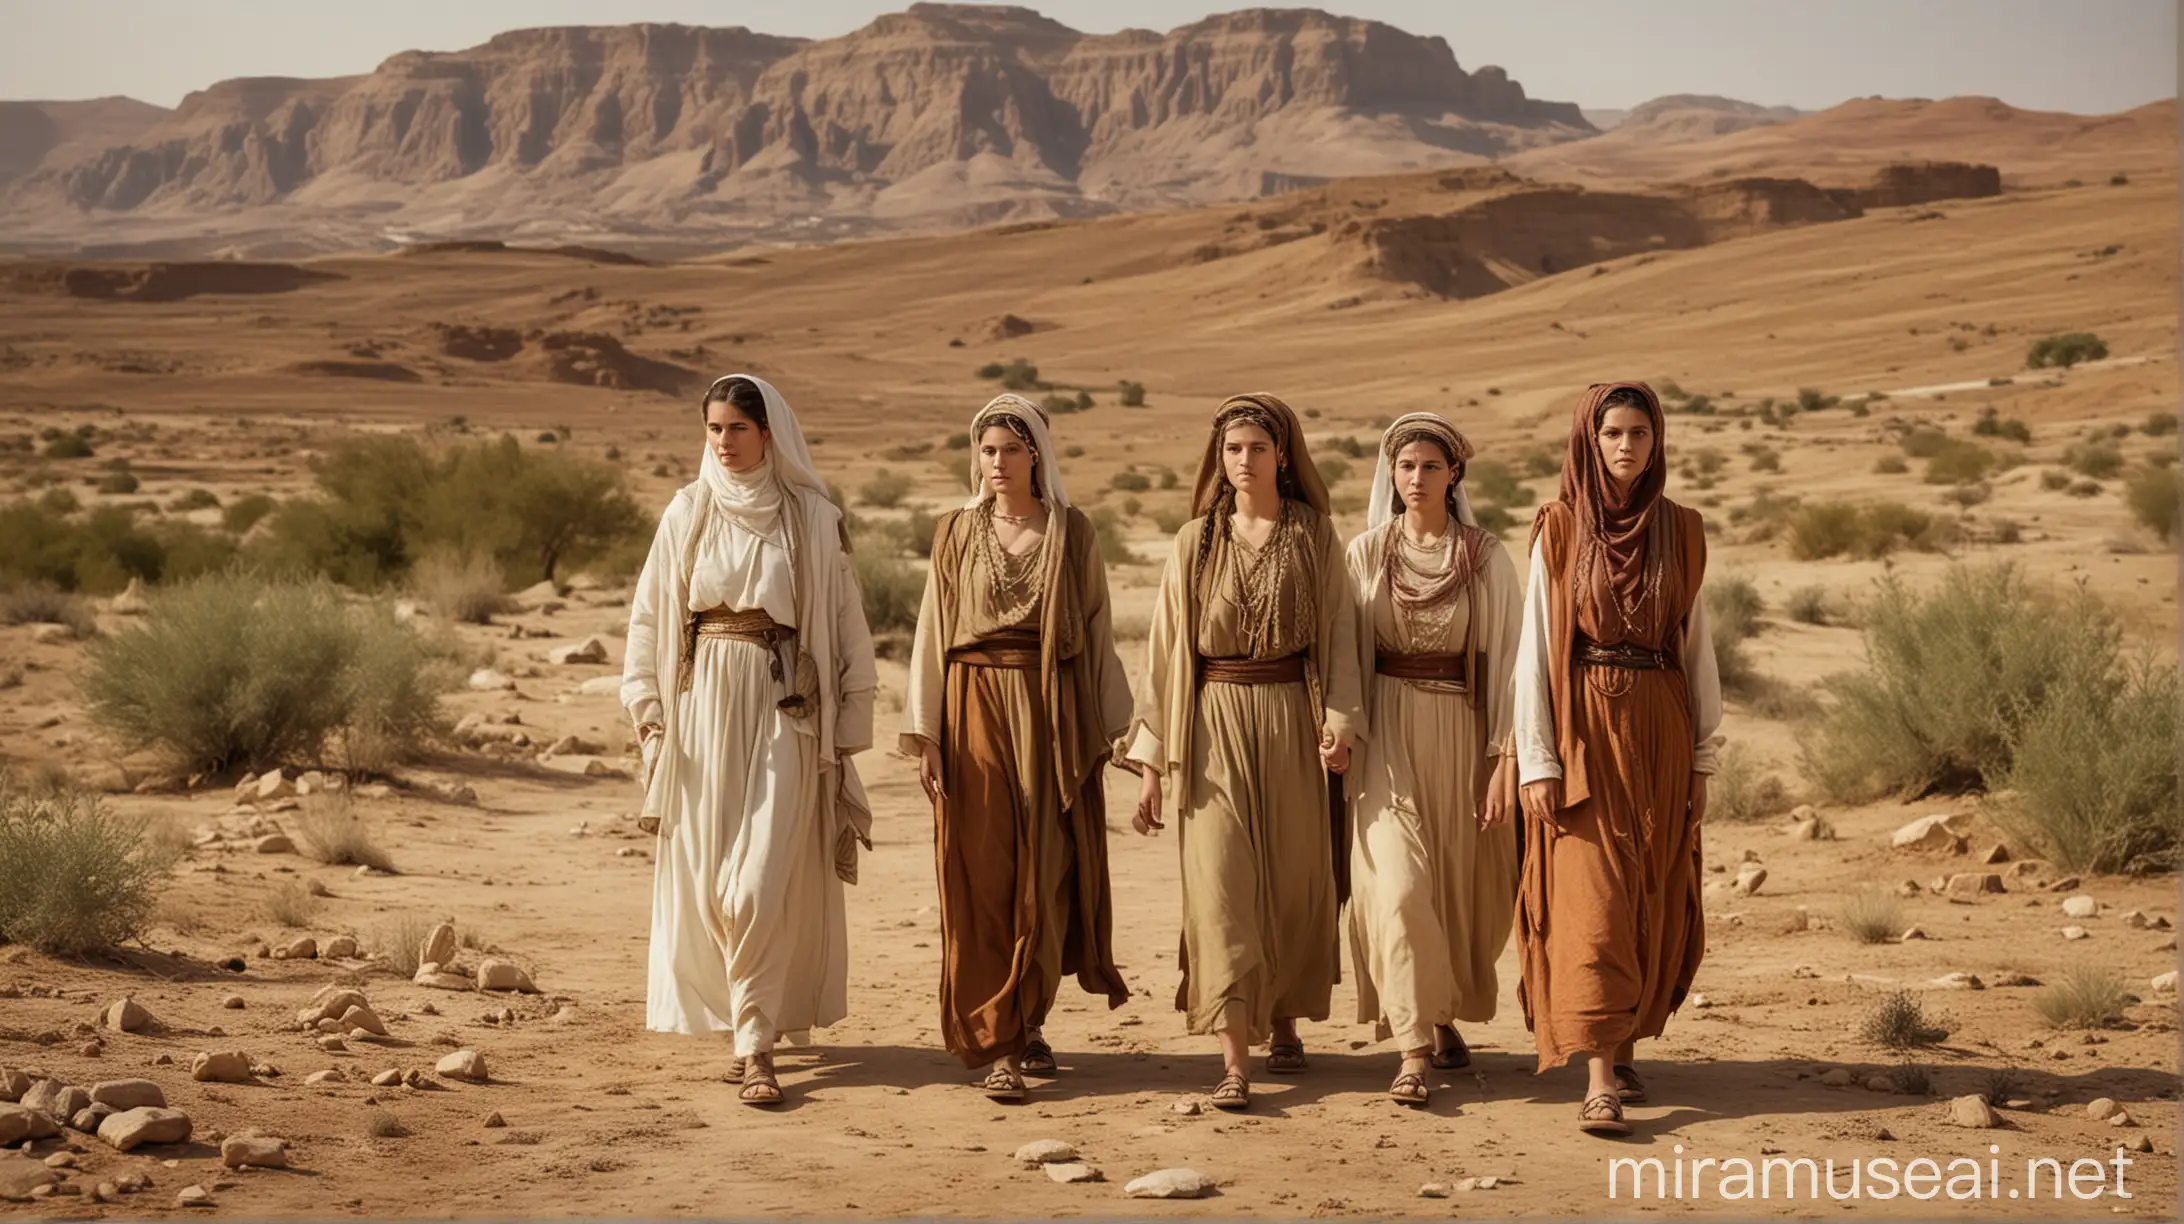 A group of five women (Hoglah and her sisters) walking towards Moses and Eleazar, dressed in ancient Hebrew attire, with a desert landscape in the background